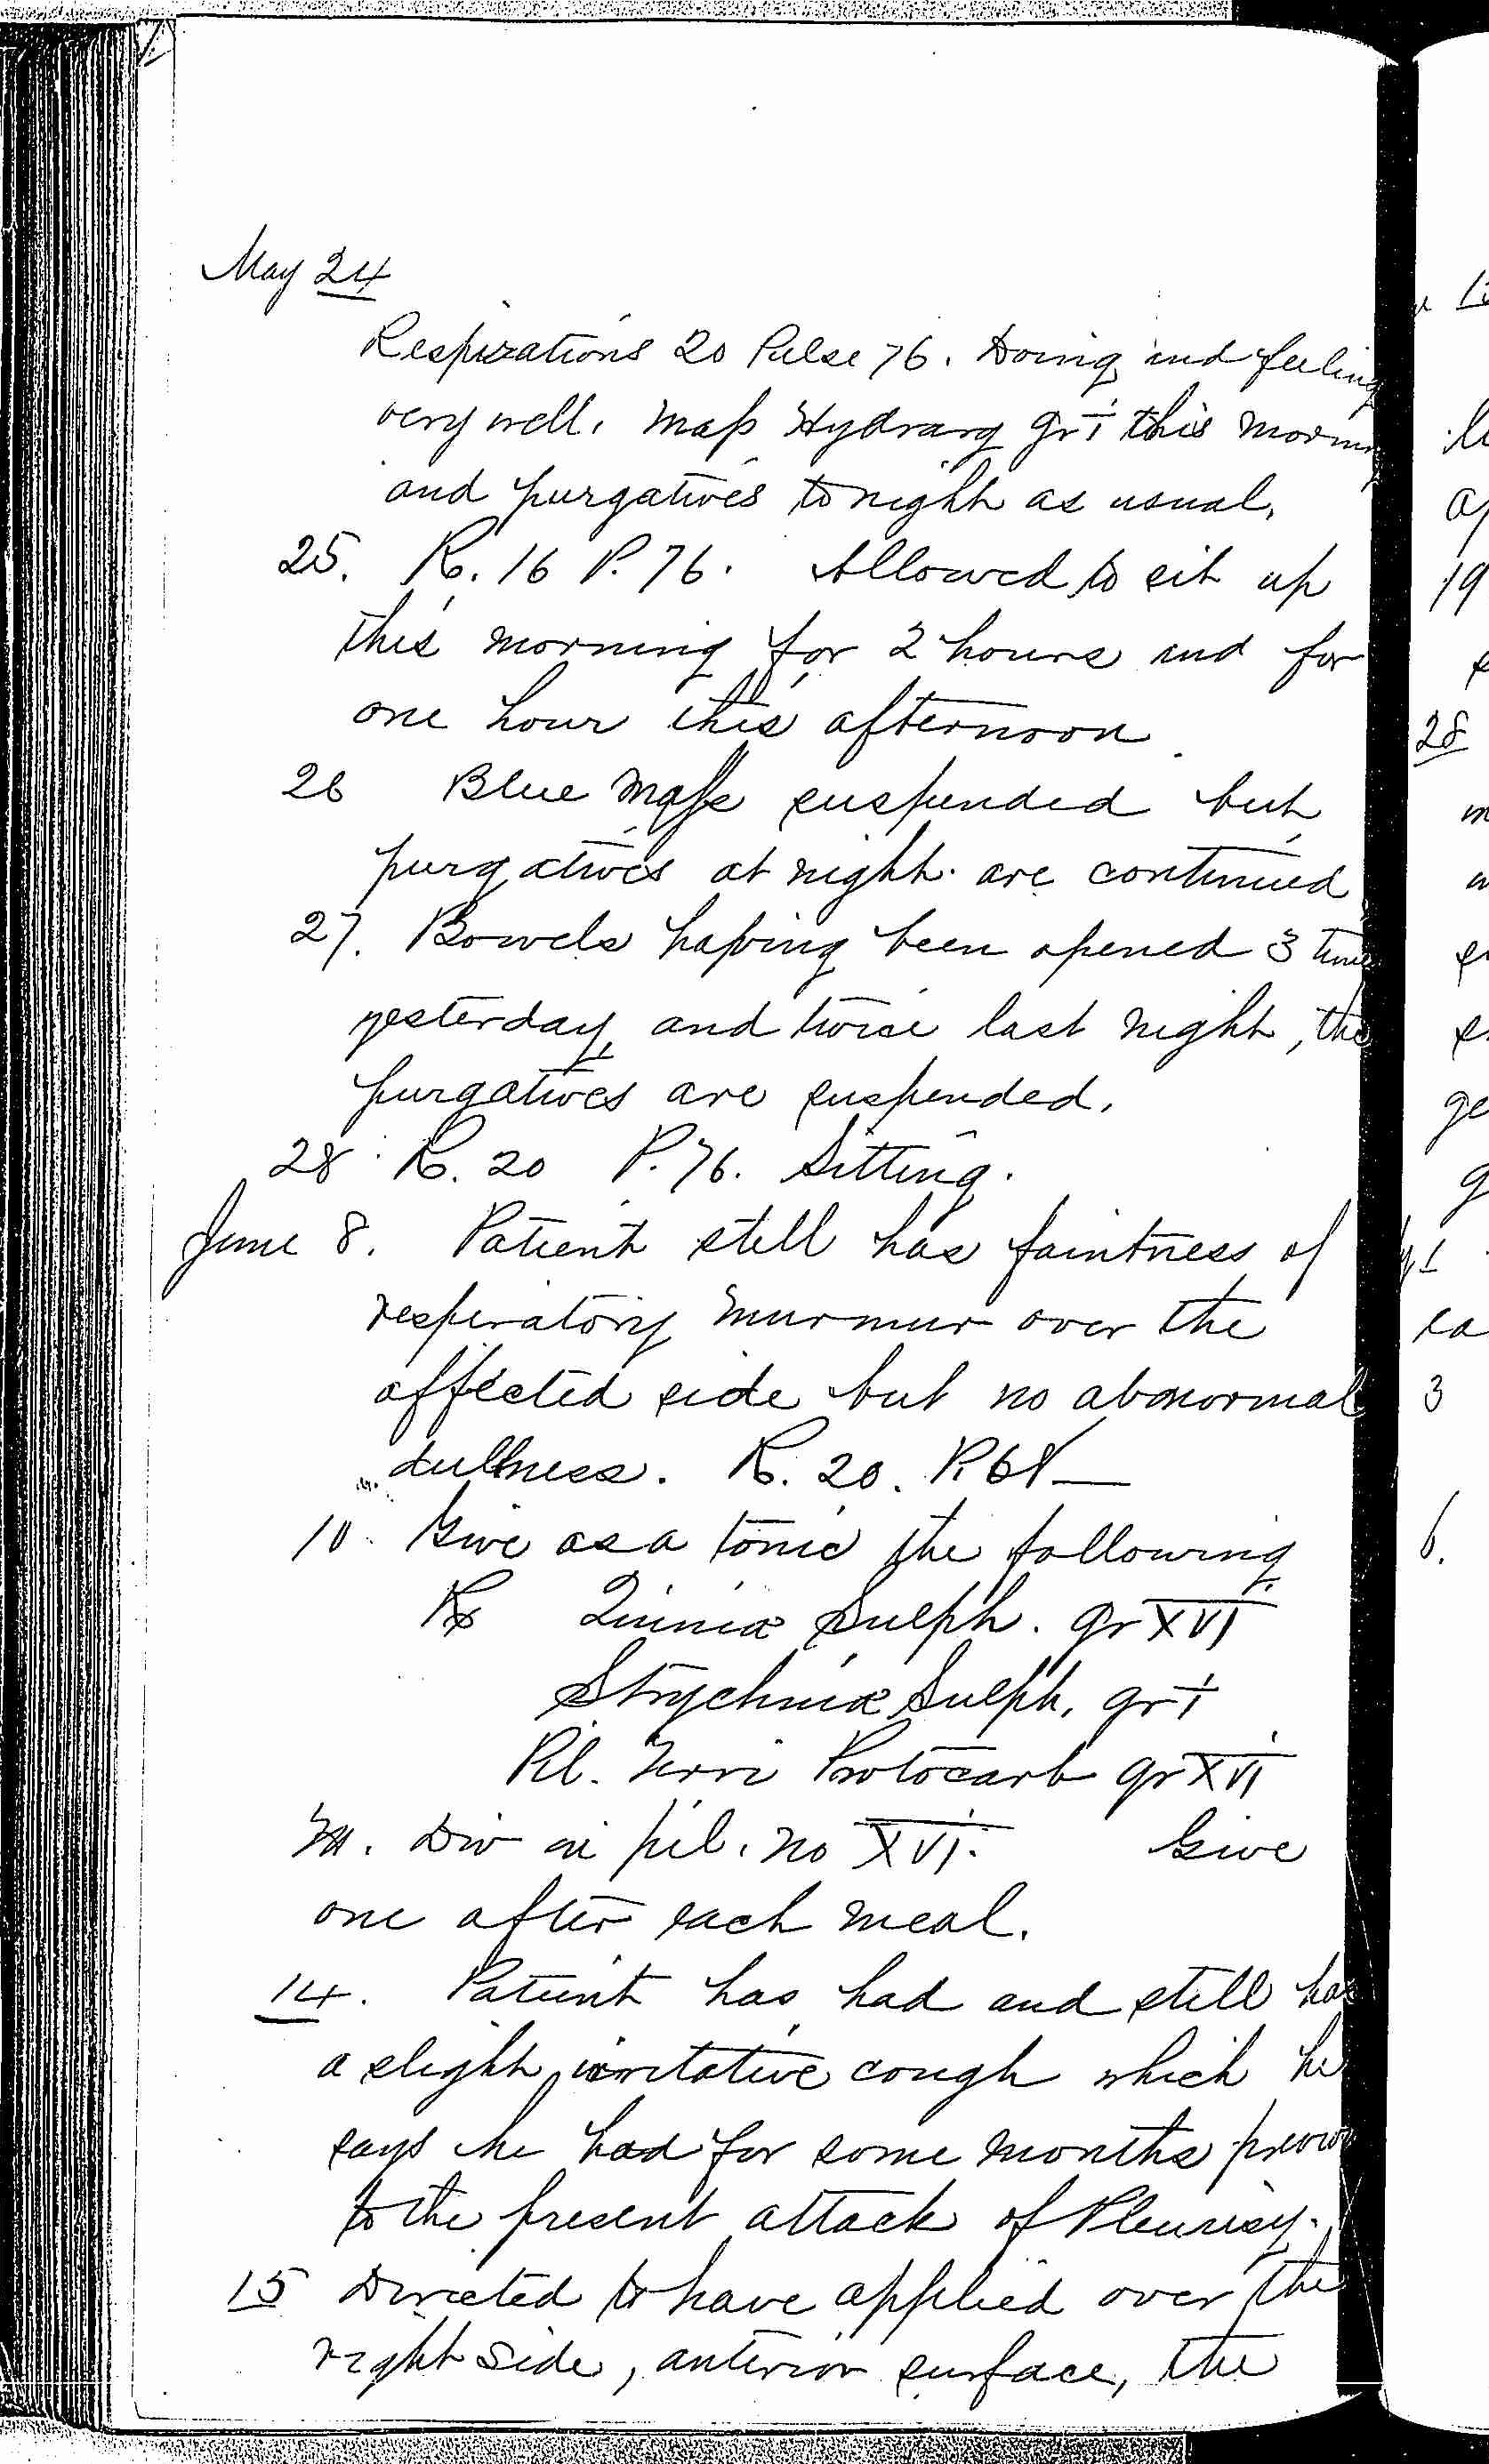 Entry for James W. Quinn (page 6 of 7) in the log Hospital Tickets and Case Papers - Naval Hospital - Washington, D.C. - 1868-69